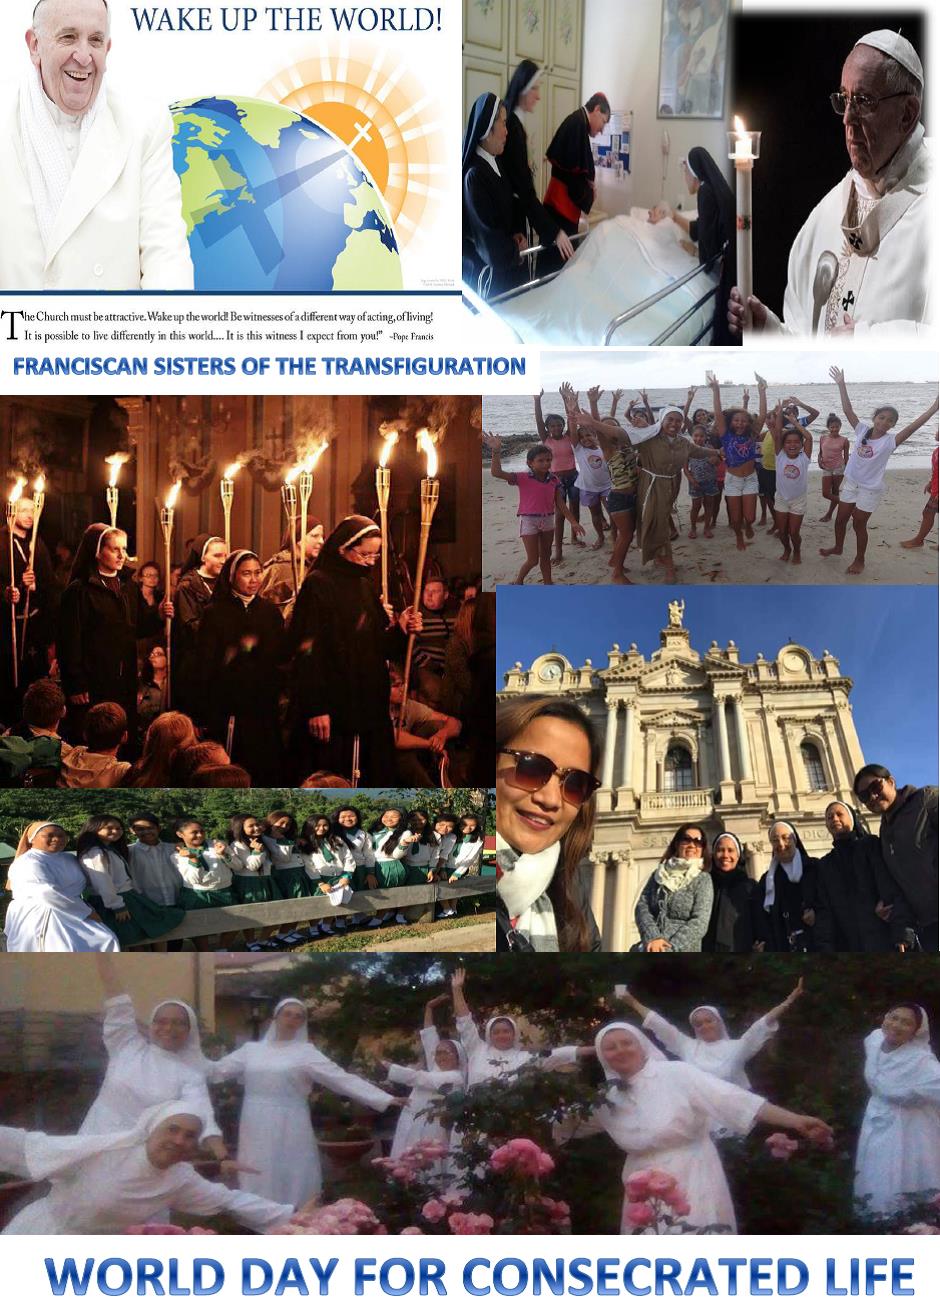 FRANCISCAN SISTERS OF THE TRANSFIGURATION